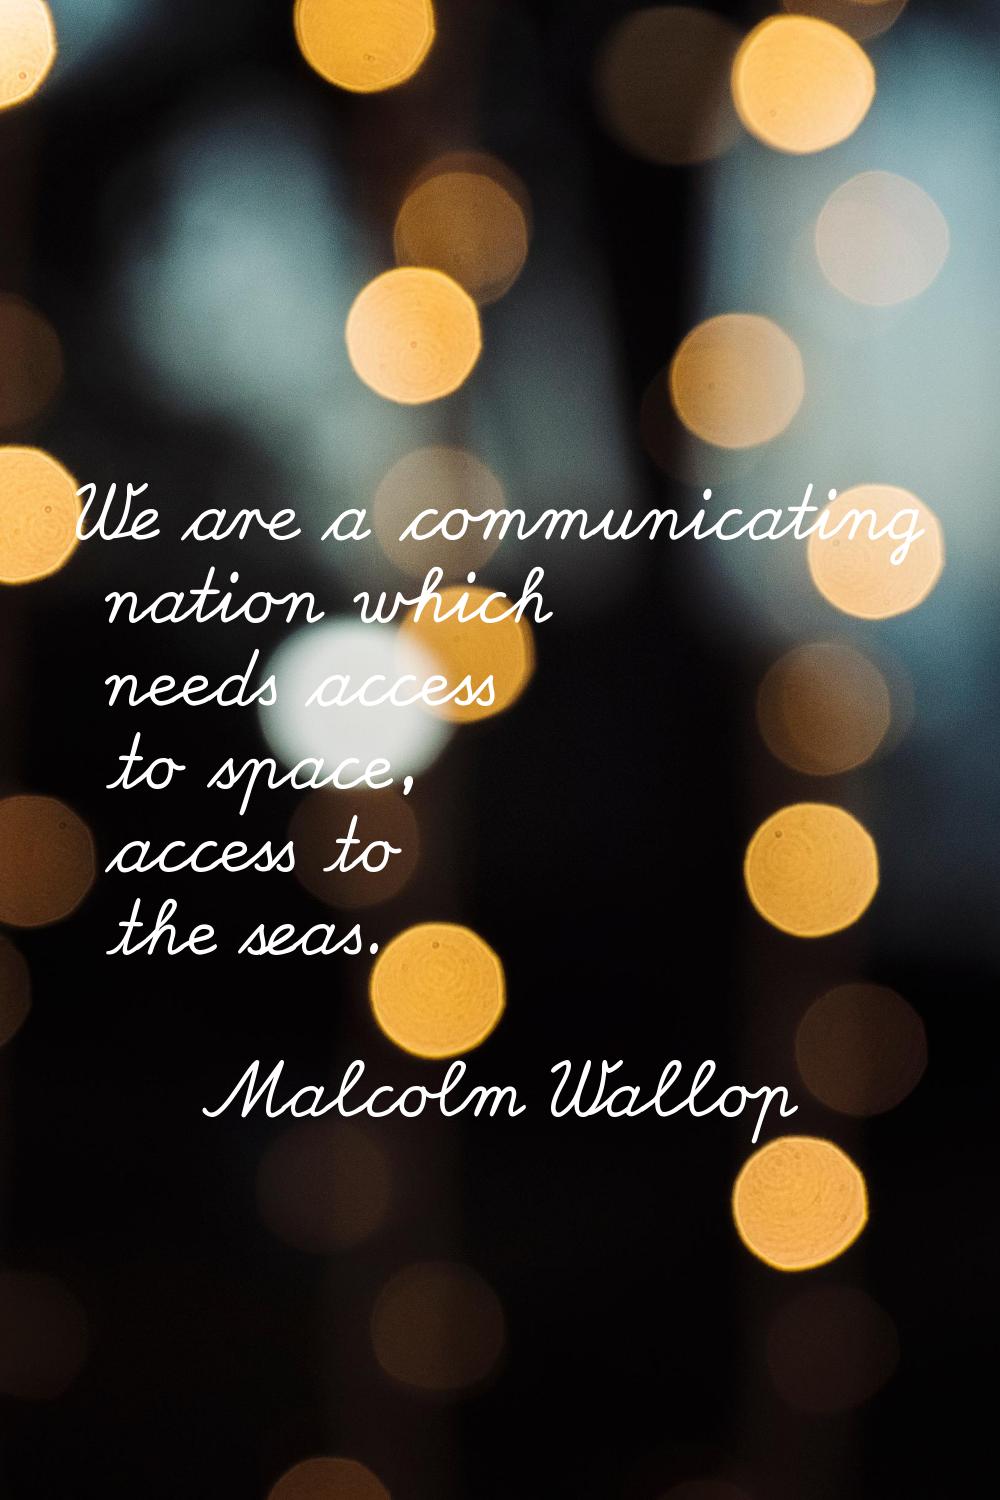 We are a communicating nation which needs access to space, access to the seas.